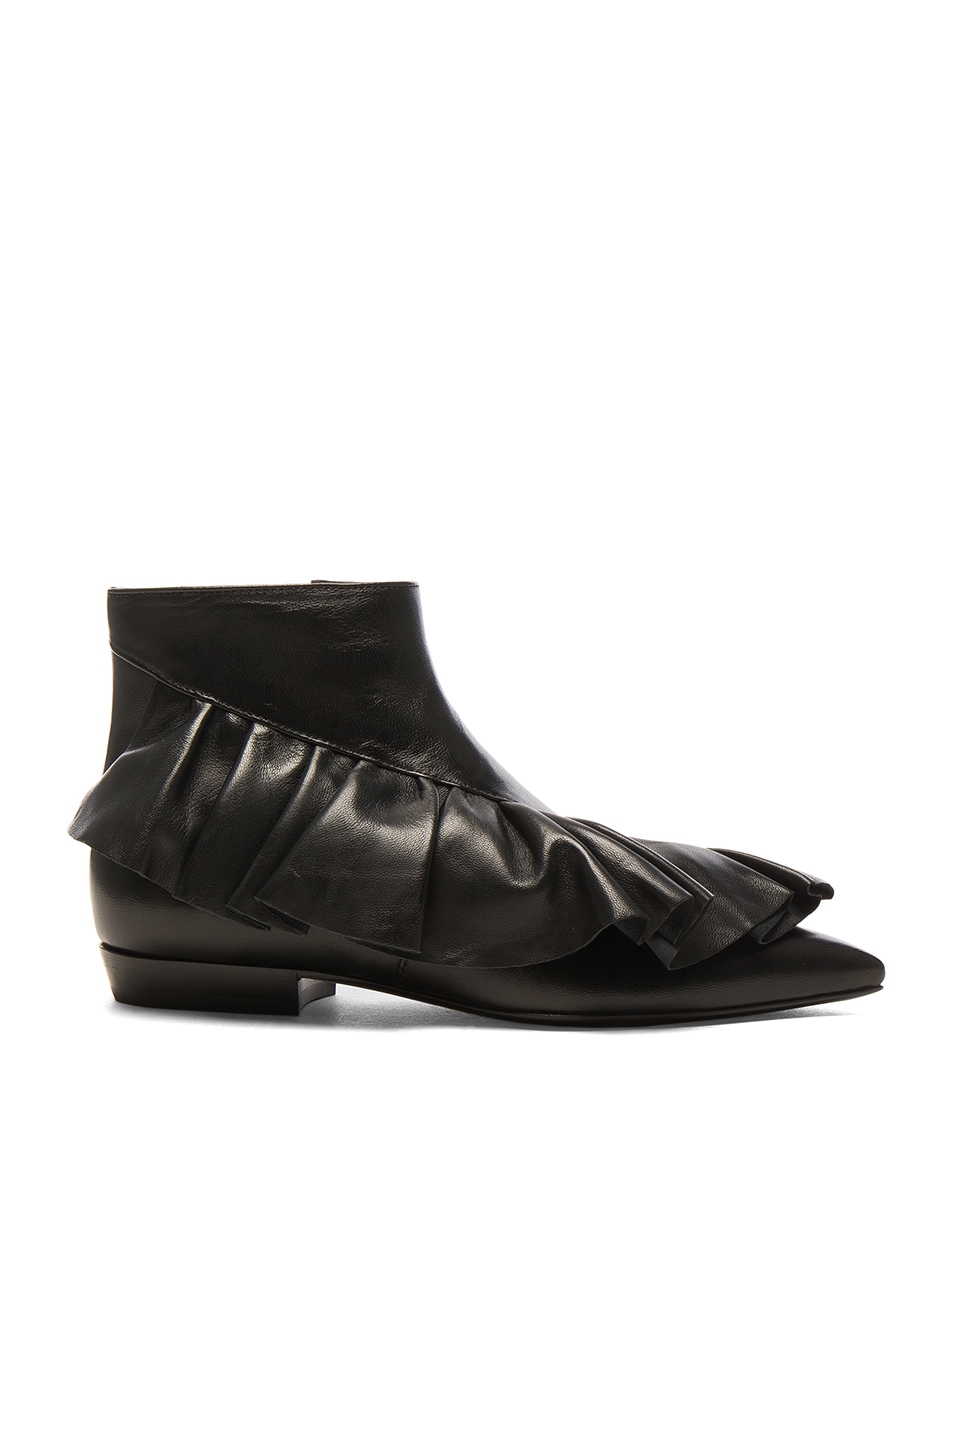 Image 1 of JW Anderson Leather Ruffle Booties in Black